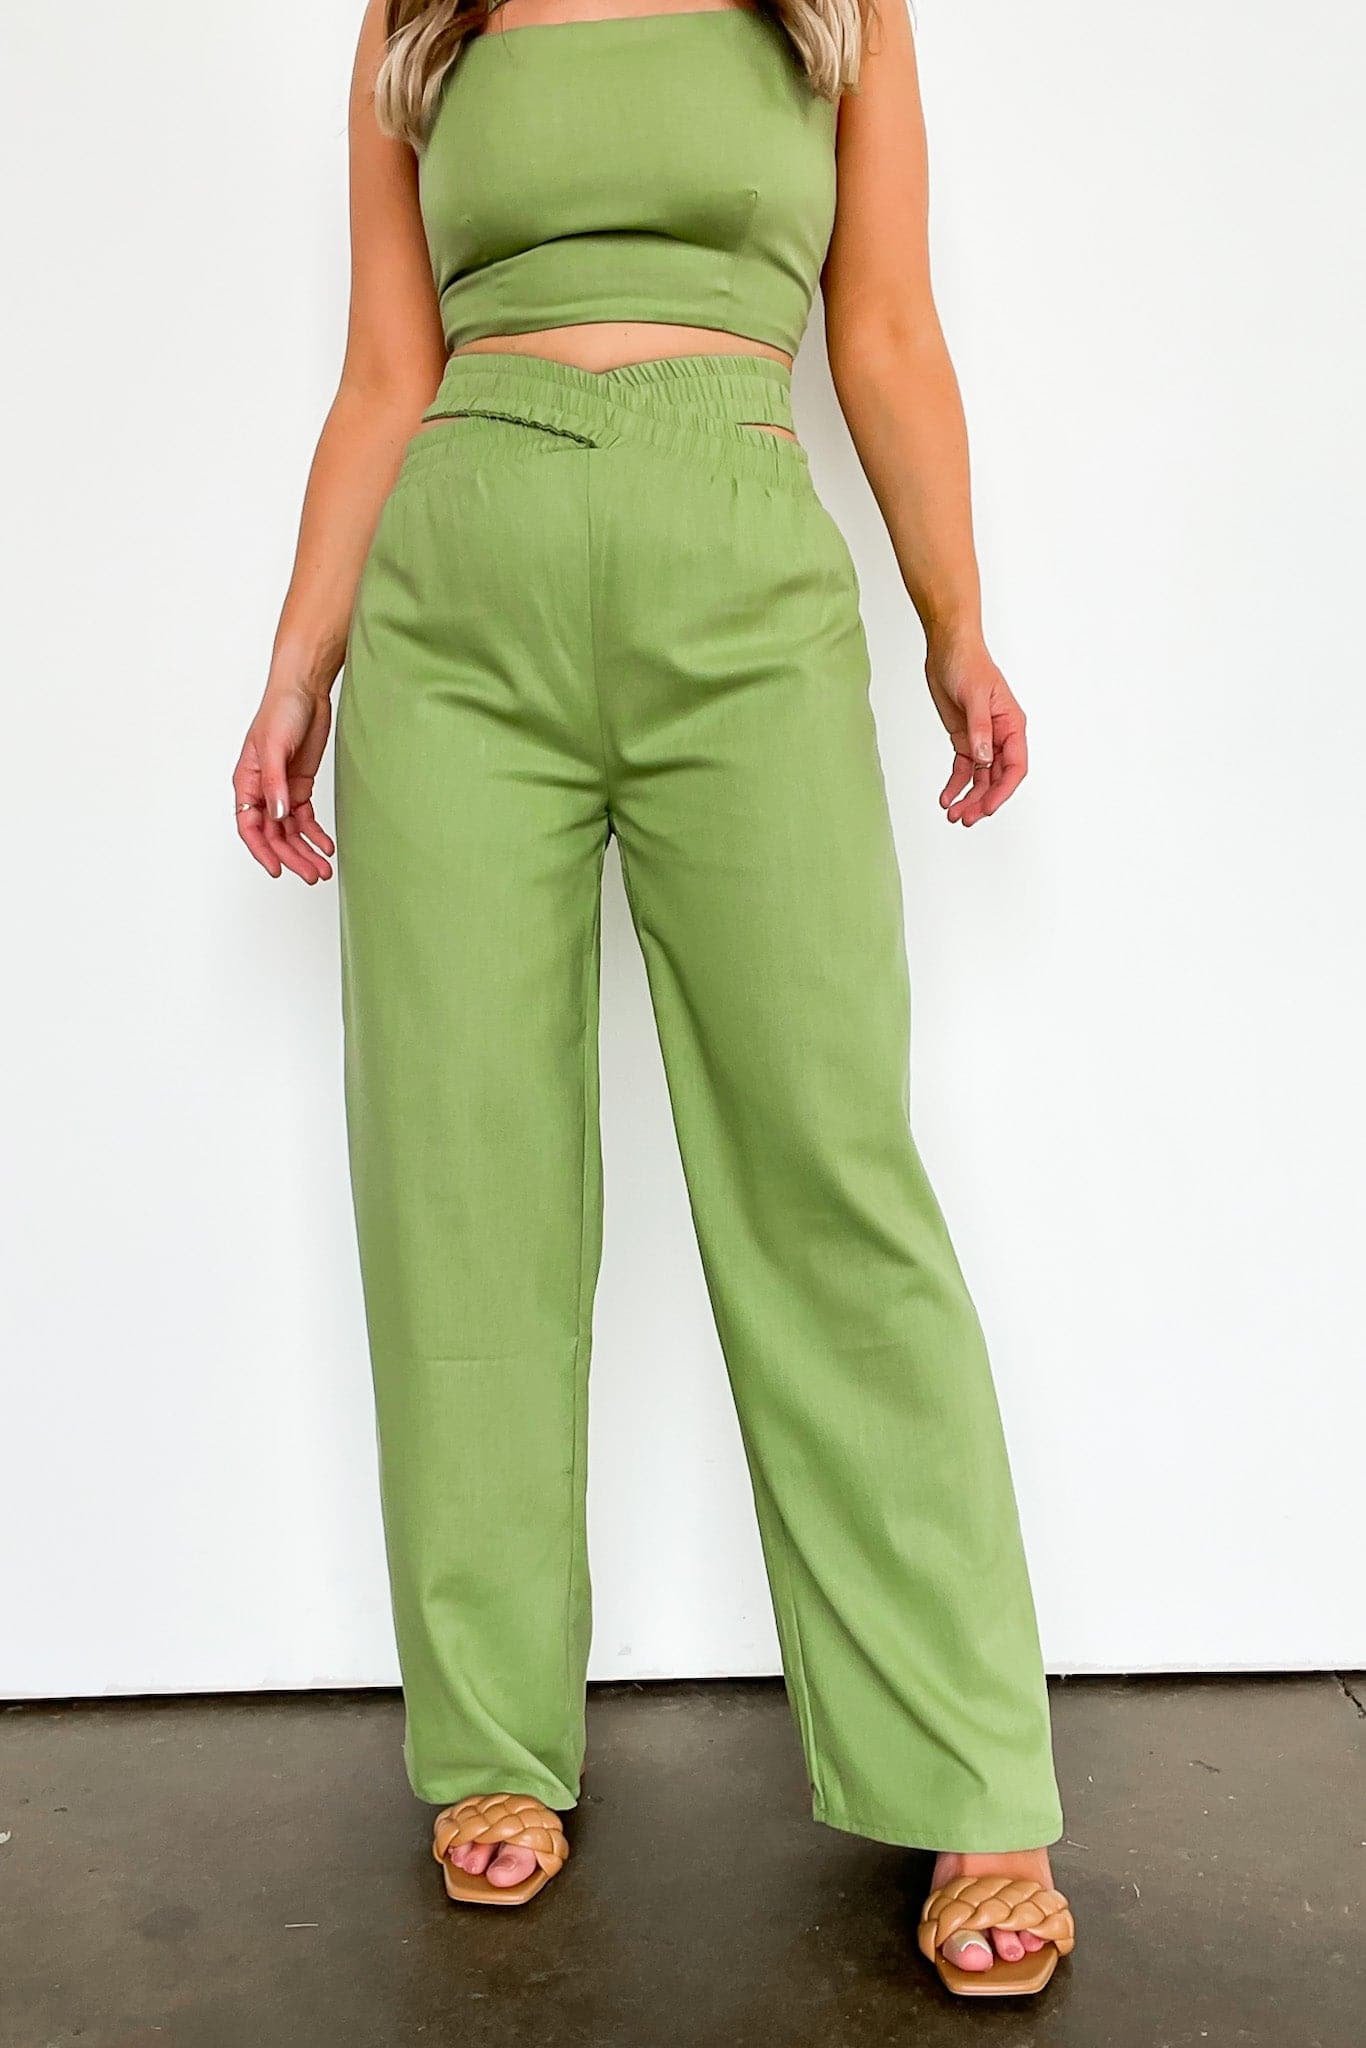 S / Green Miami Afternoons Wide Leg Pants - FINAL SALE - Madison and Mallory